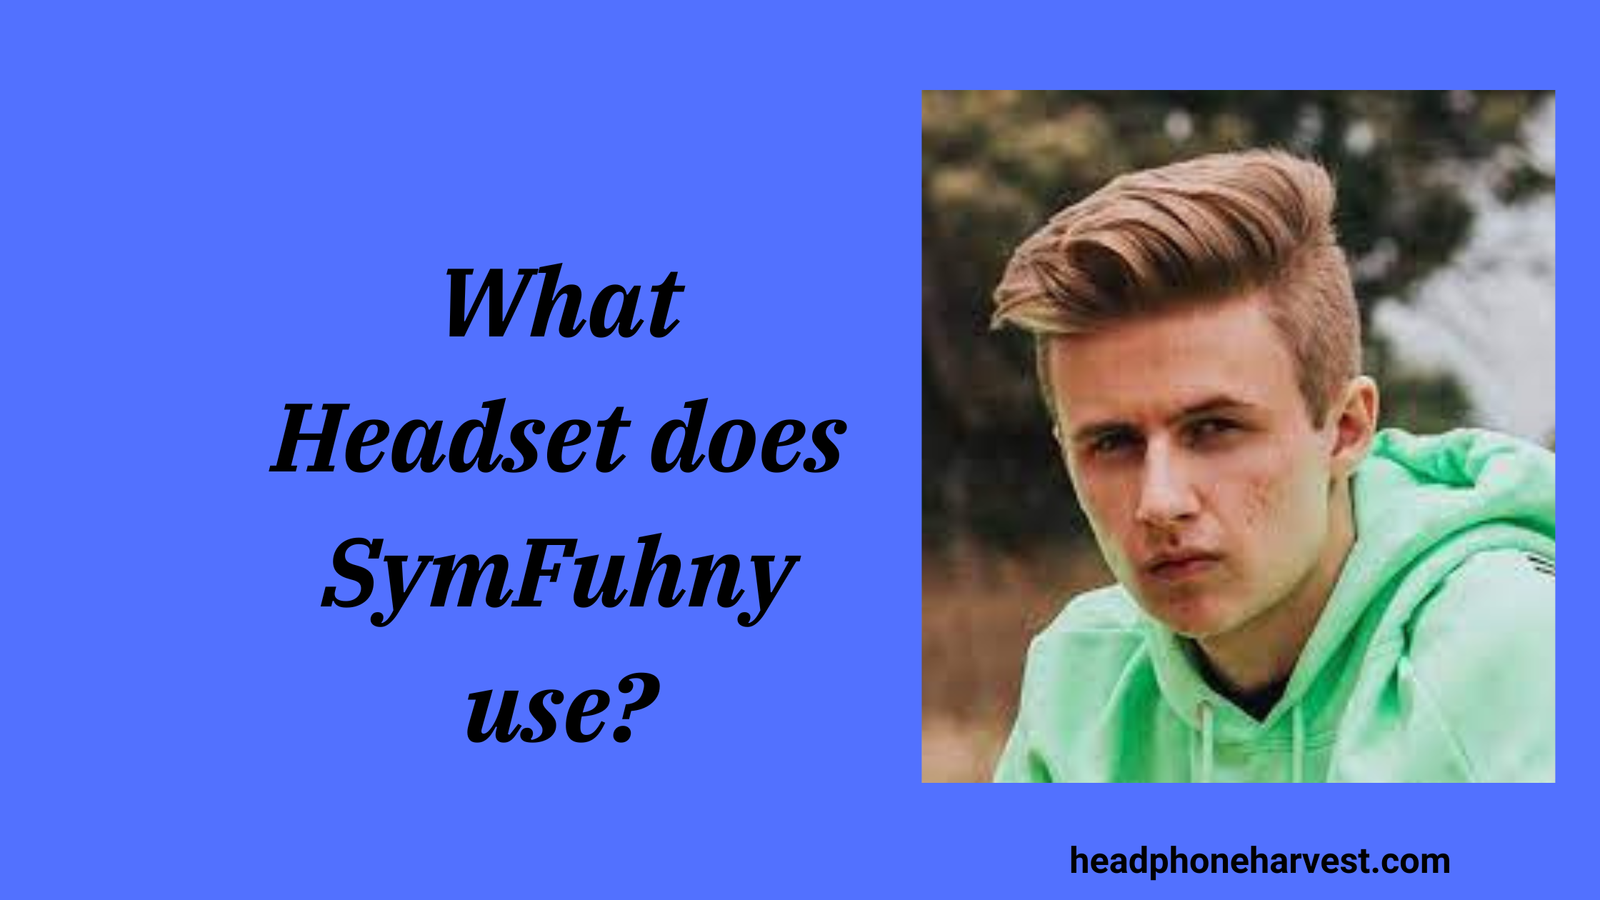 What Headset does SymFuhny use?